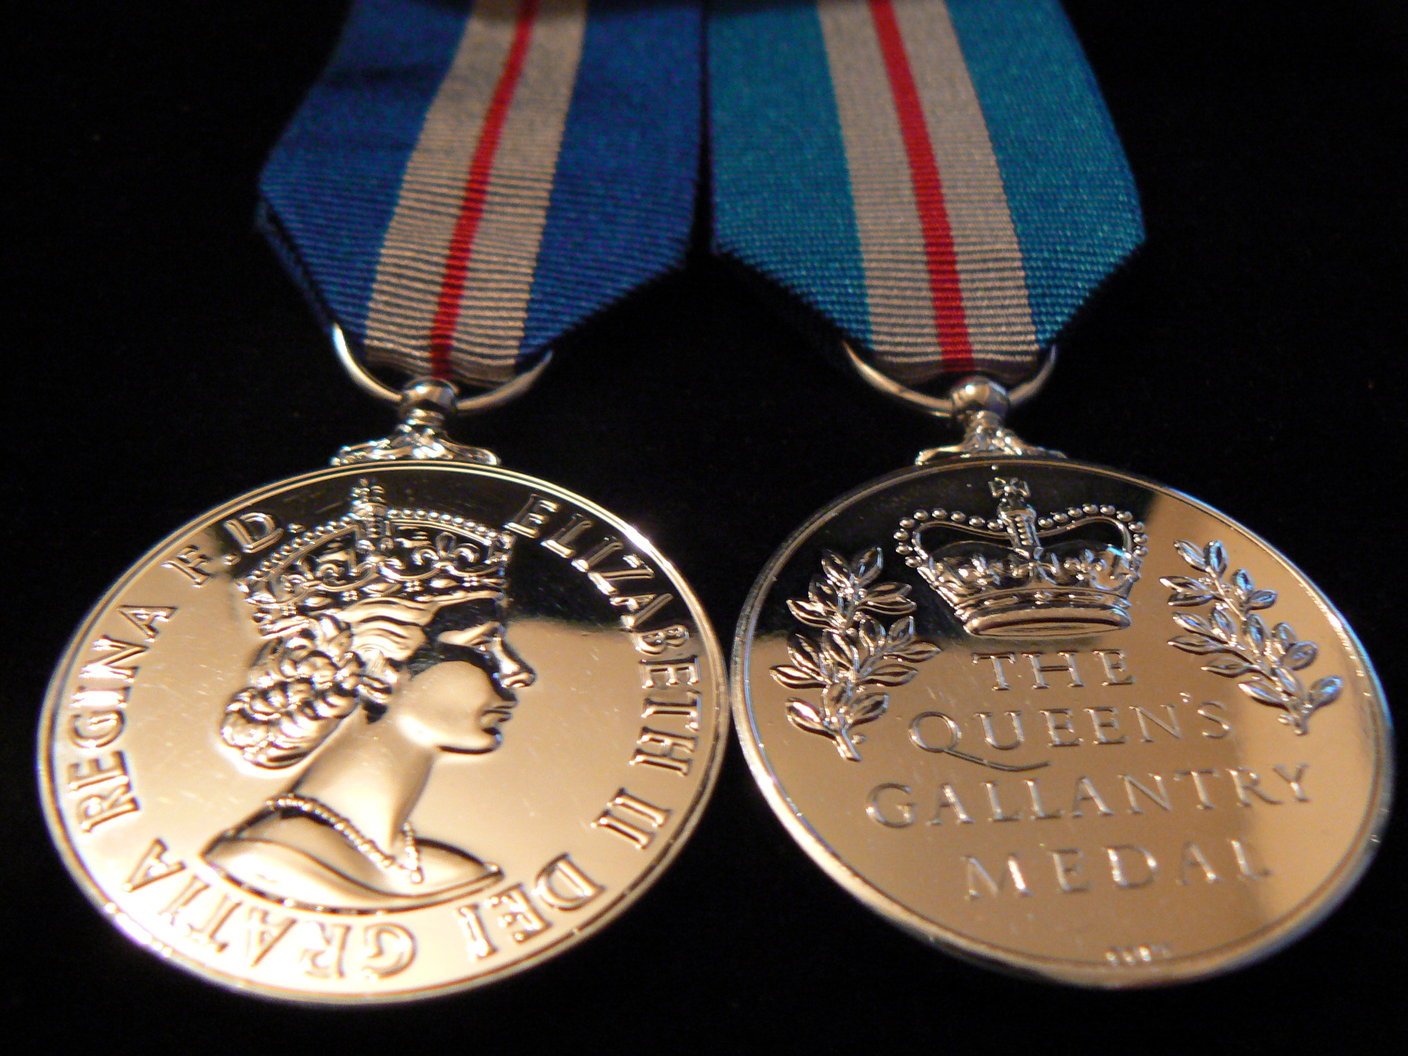 The Queen's Gallantry Medal which was awarded to Foster 